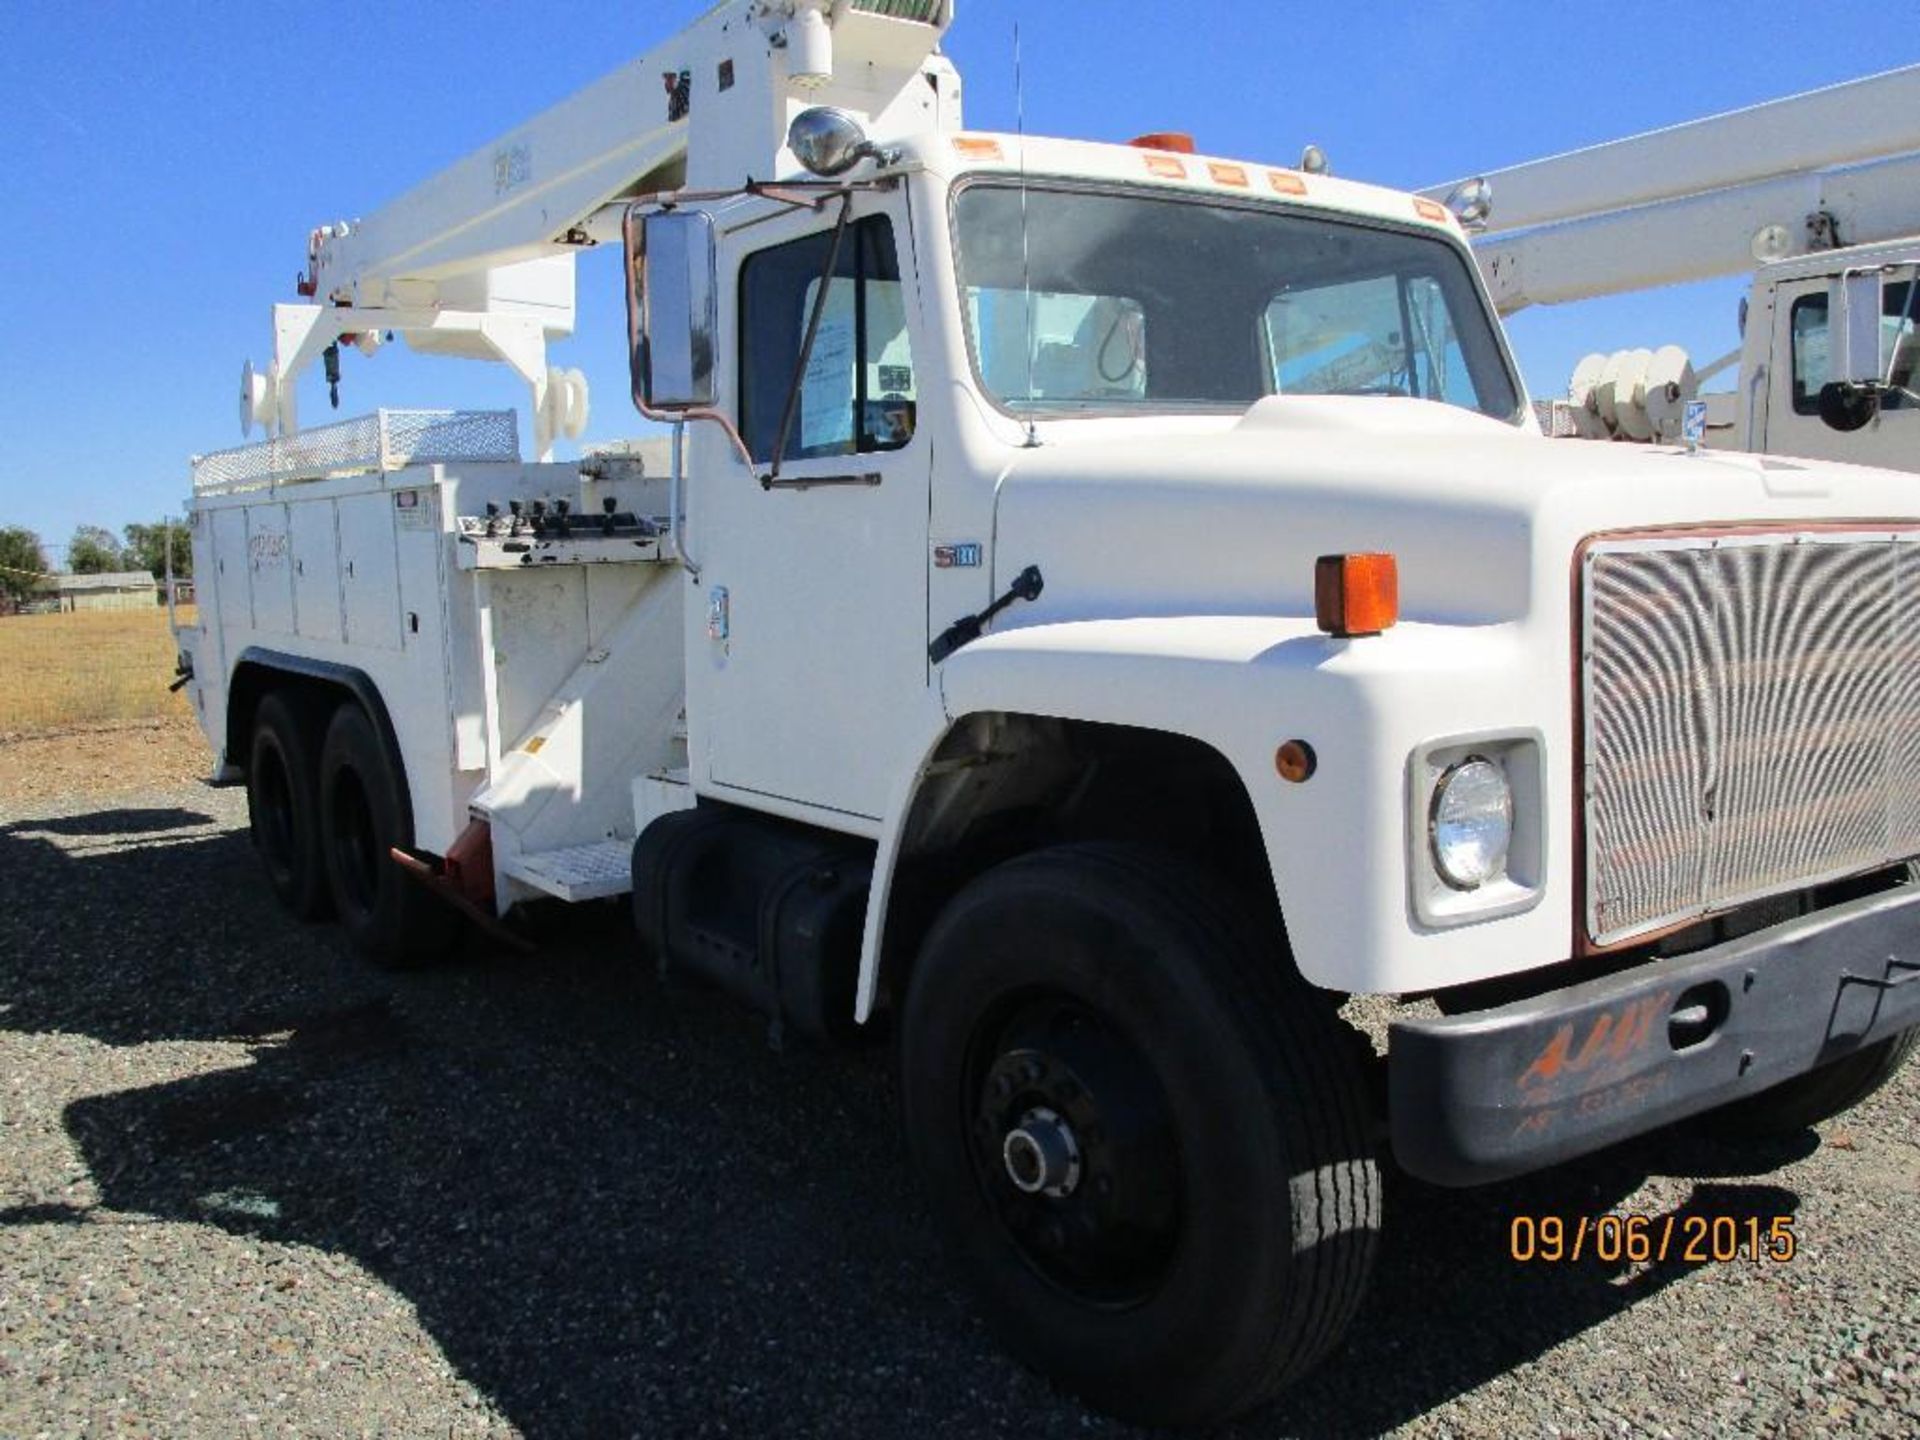 VIN 1HTLKTVR4FHA48391 LIC  20,000lb capacity with upper controls 62842 miles air brakes - Image 3 of 18